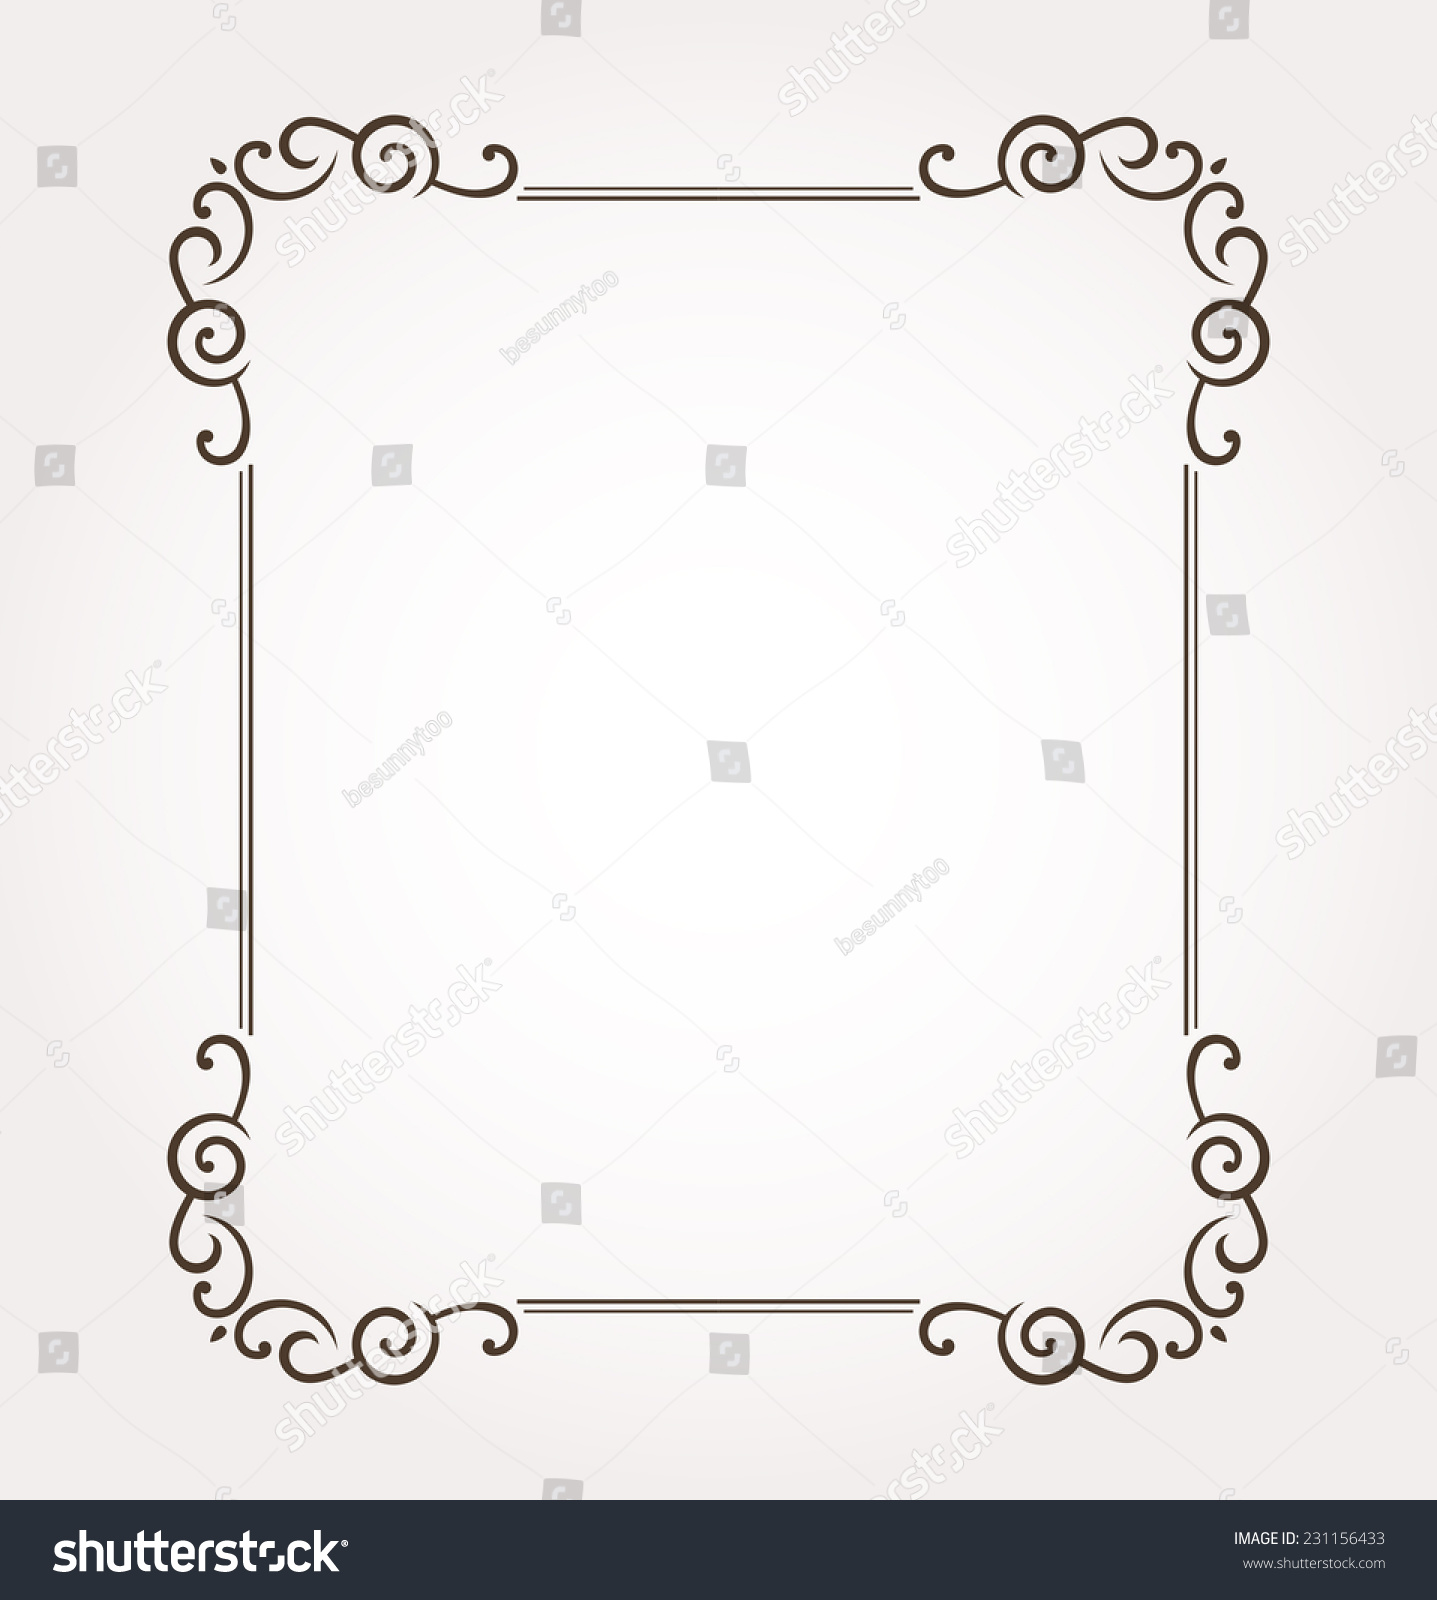 Beautiful Ornate Frame And Card Decoration. Vector Illustration ...